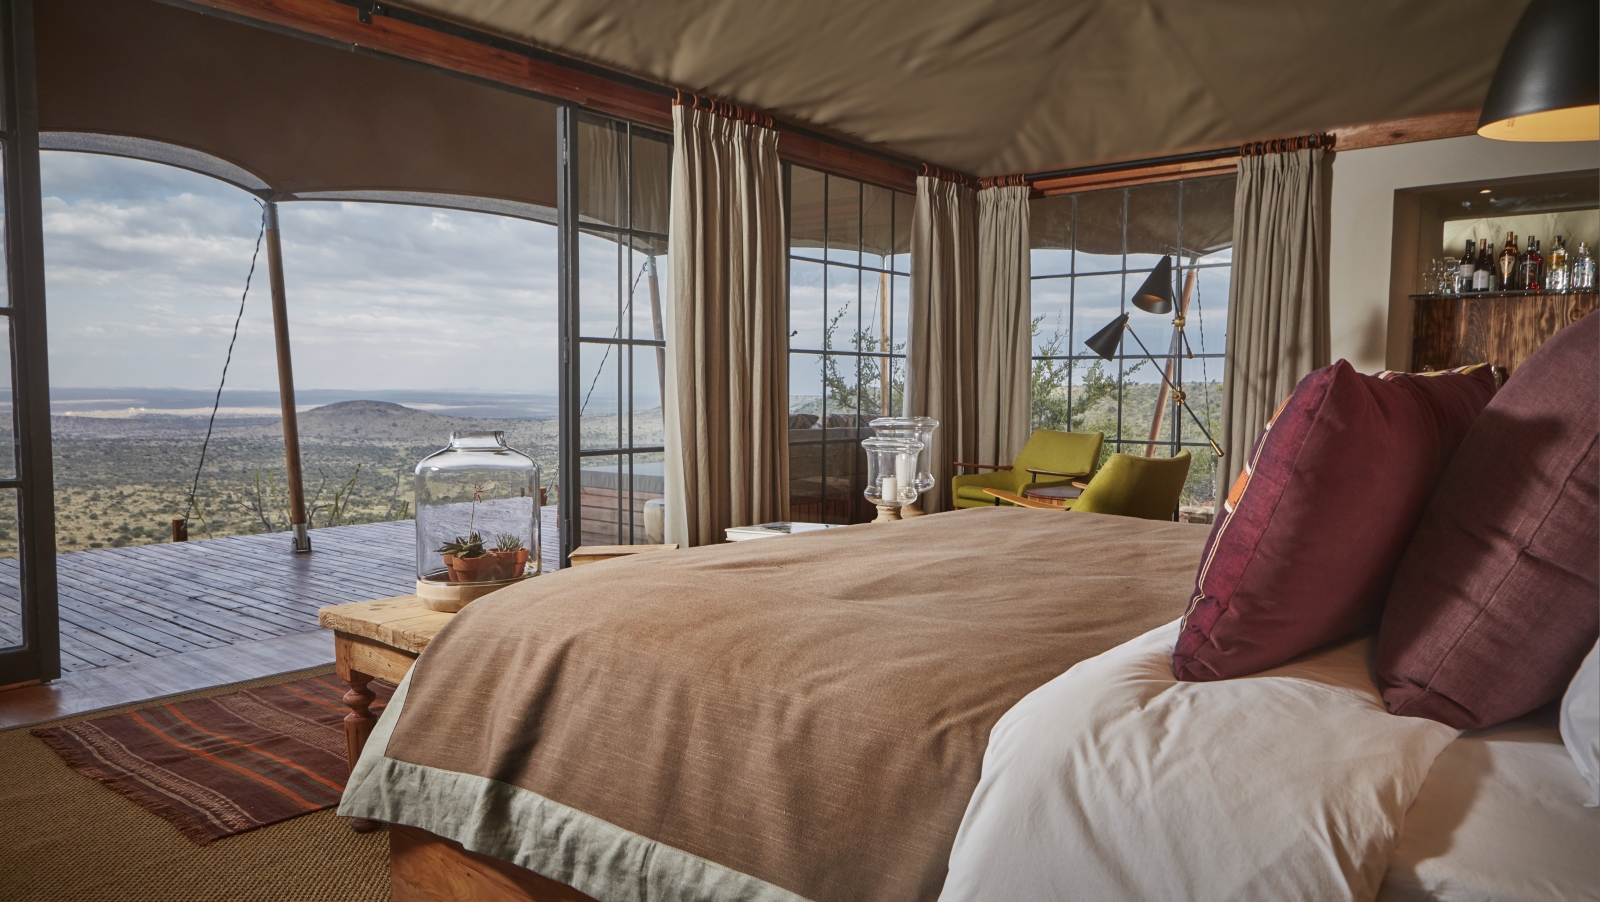 Double tented room with private verandah at luxury safari lodge Lodo Springs in the Laikipia region of Kenya